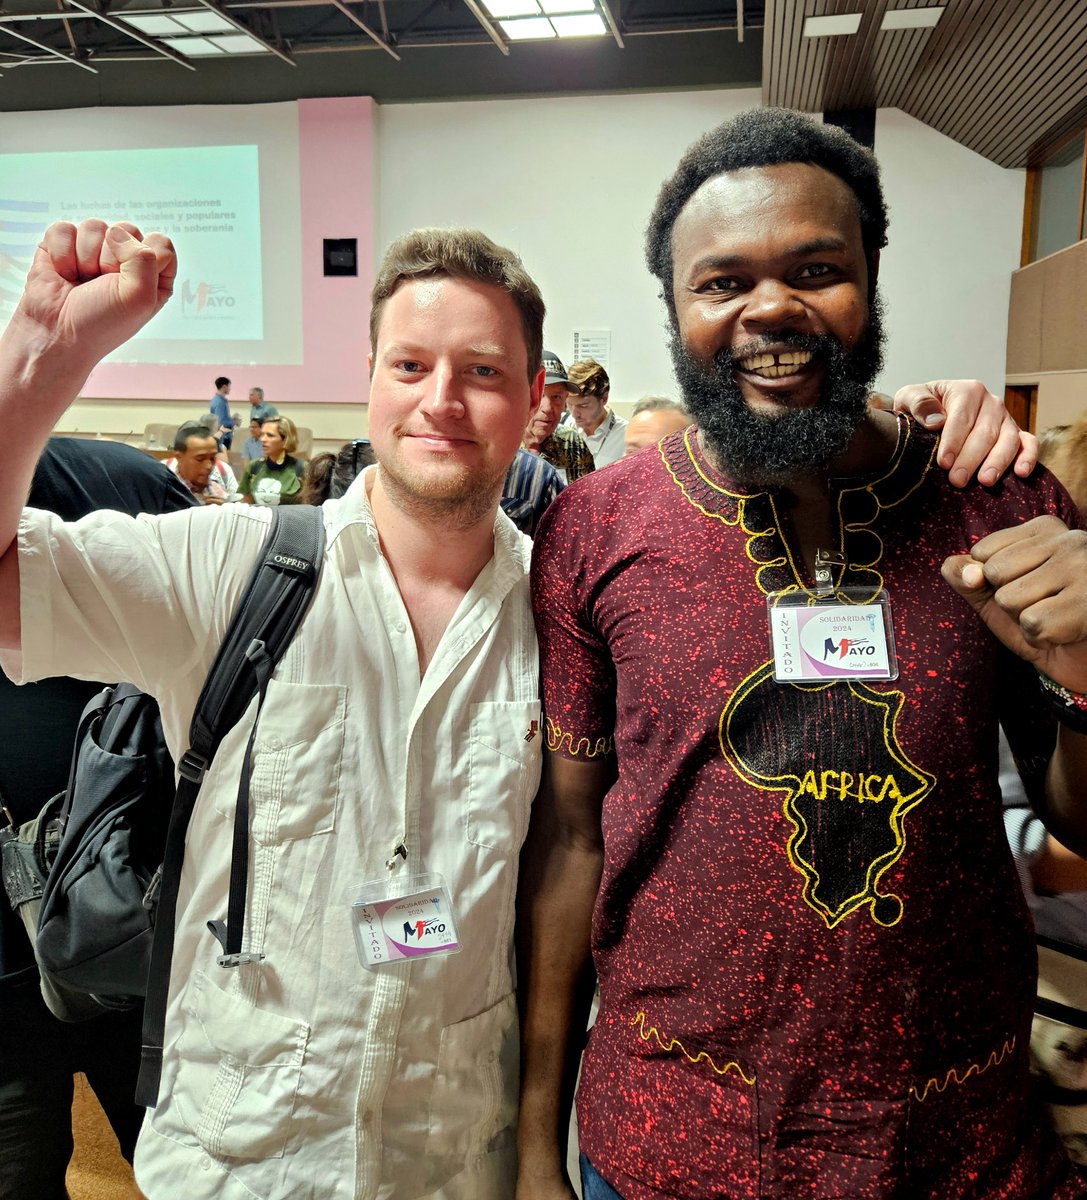 By chance, I also ran into @BookerBiro, the National Vice Chairperson and National Organizing Secretary of @CommunistsKe! We got to talk a bit about the situation in Norway and Scandinavia, as well as party-to-party communication.